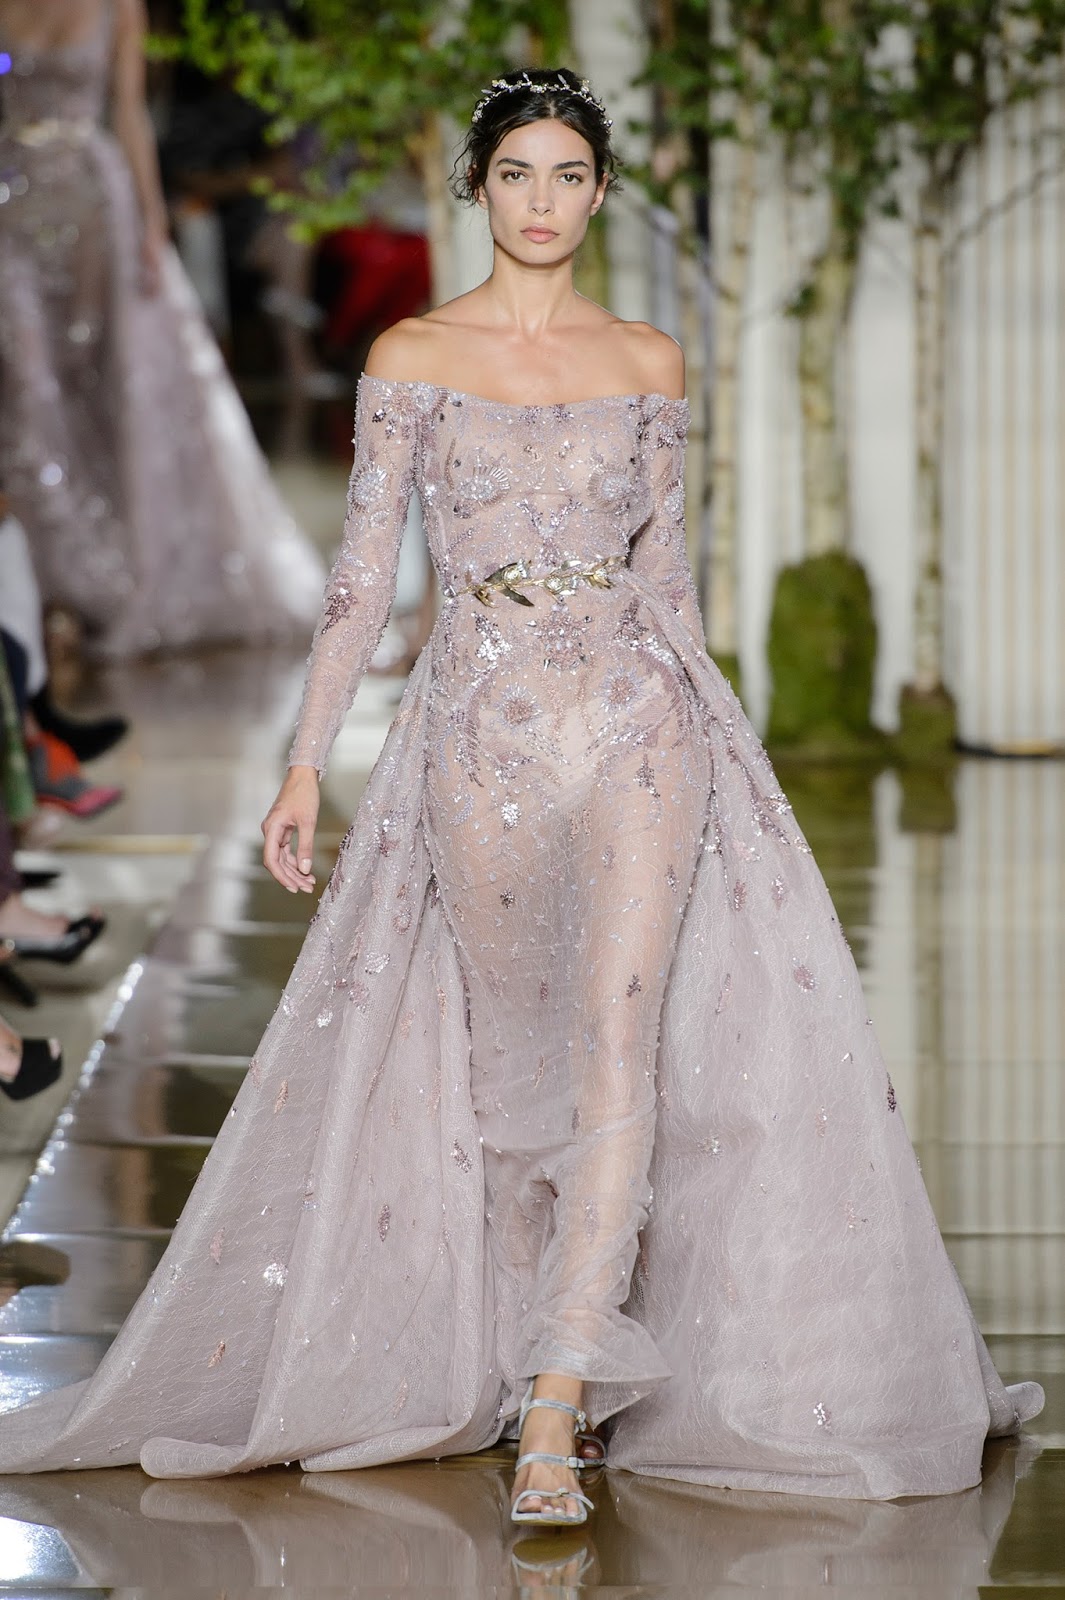 STUNNING GOWNS: ZUHAIR MURAD July 8, 2017 | ZsaZsa Bellagio - Like No Other